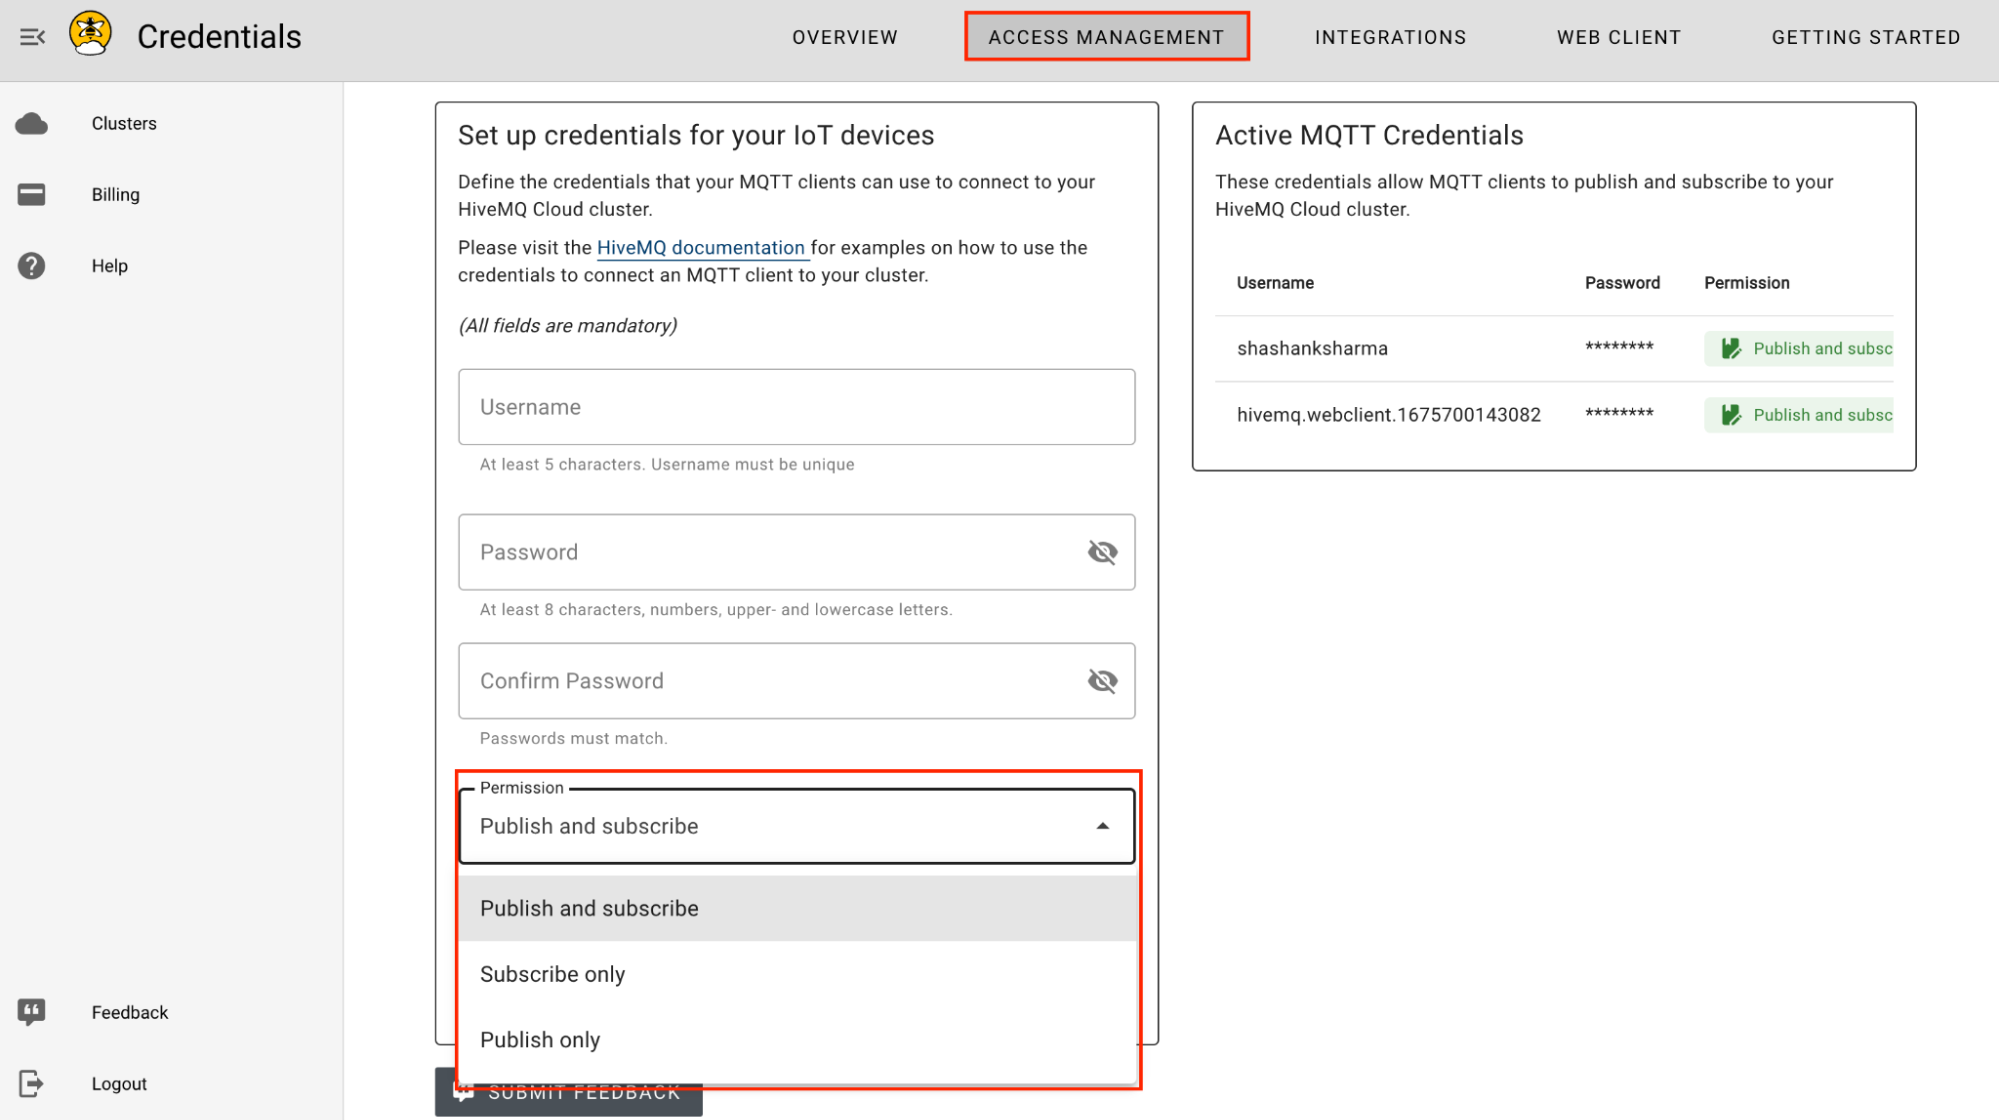 MQTT credentials can be set up under the access management tab.